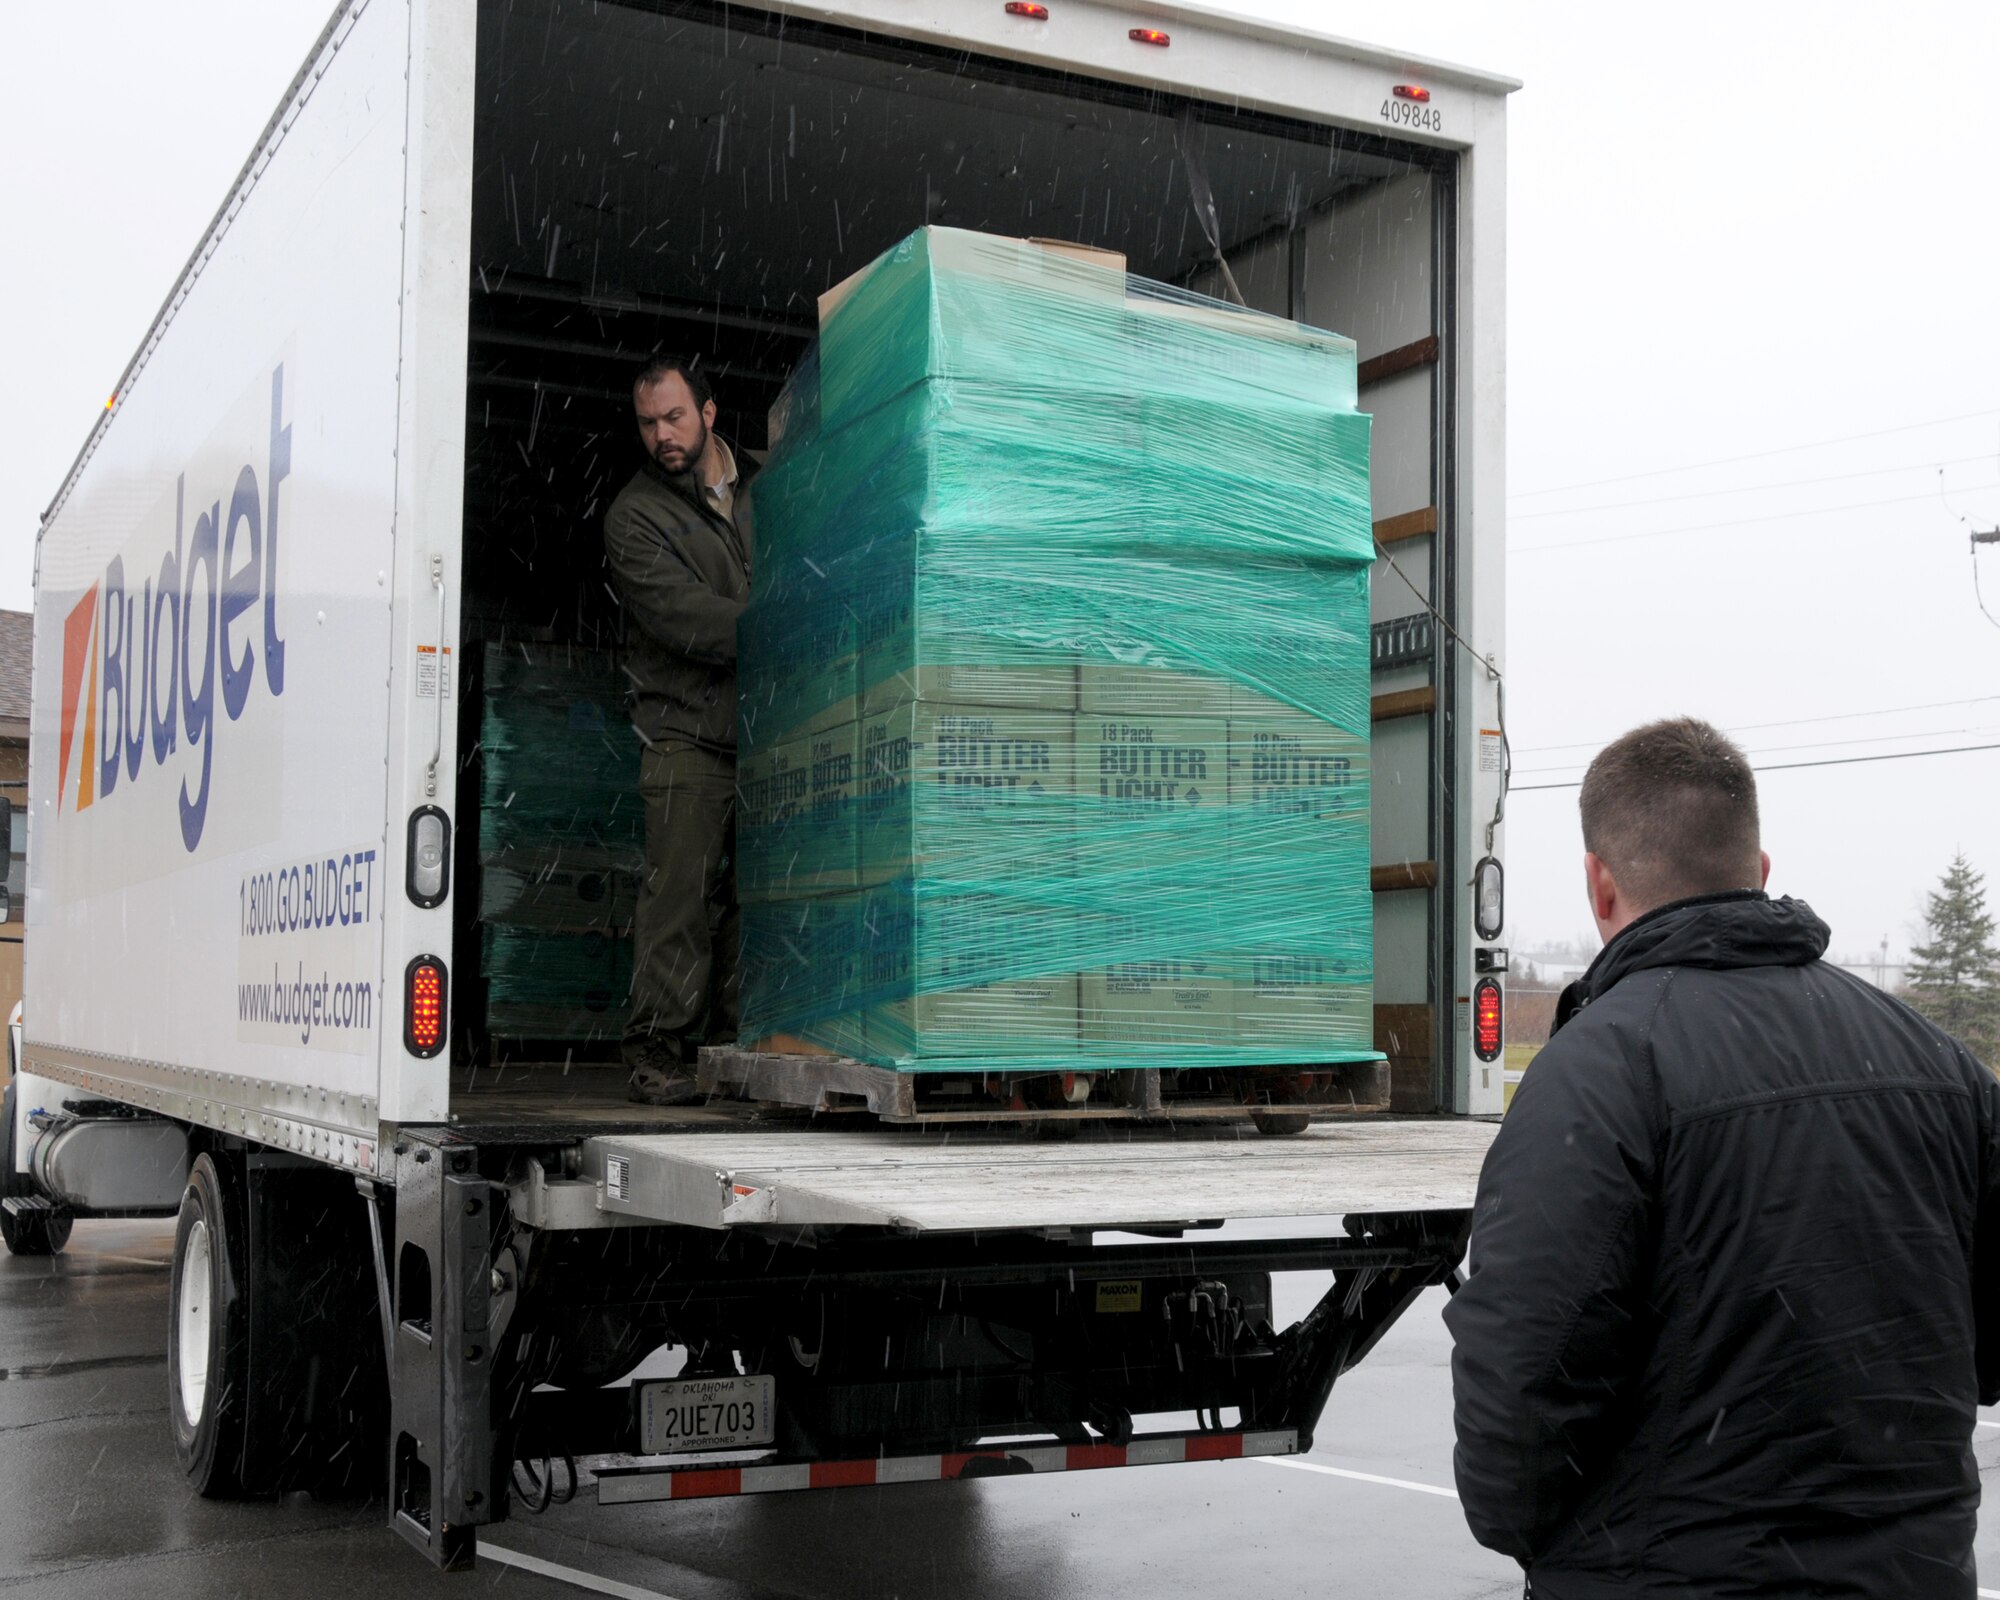 Justin King (left), Finance and Marketing Director, Boy Scouts Greater Niagara Frontier Council unloads a pallet full of gourmet popcorn while Patrick Covell Boy Scouts District Director gets ready to receive it at the Niagara Falls Air Reserve Station, N.Y. on December 17, 2014. Over 1,000 packages of gourmet caramel corn, kettle corn, chocolate and butter popcorns were delivered to the base as part of the popcorn for military program. (U.S. Air Force photo by Peter Borys)